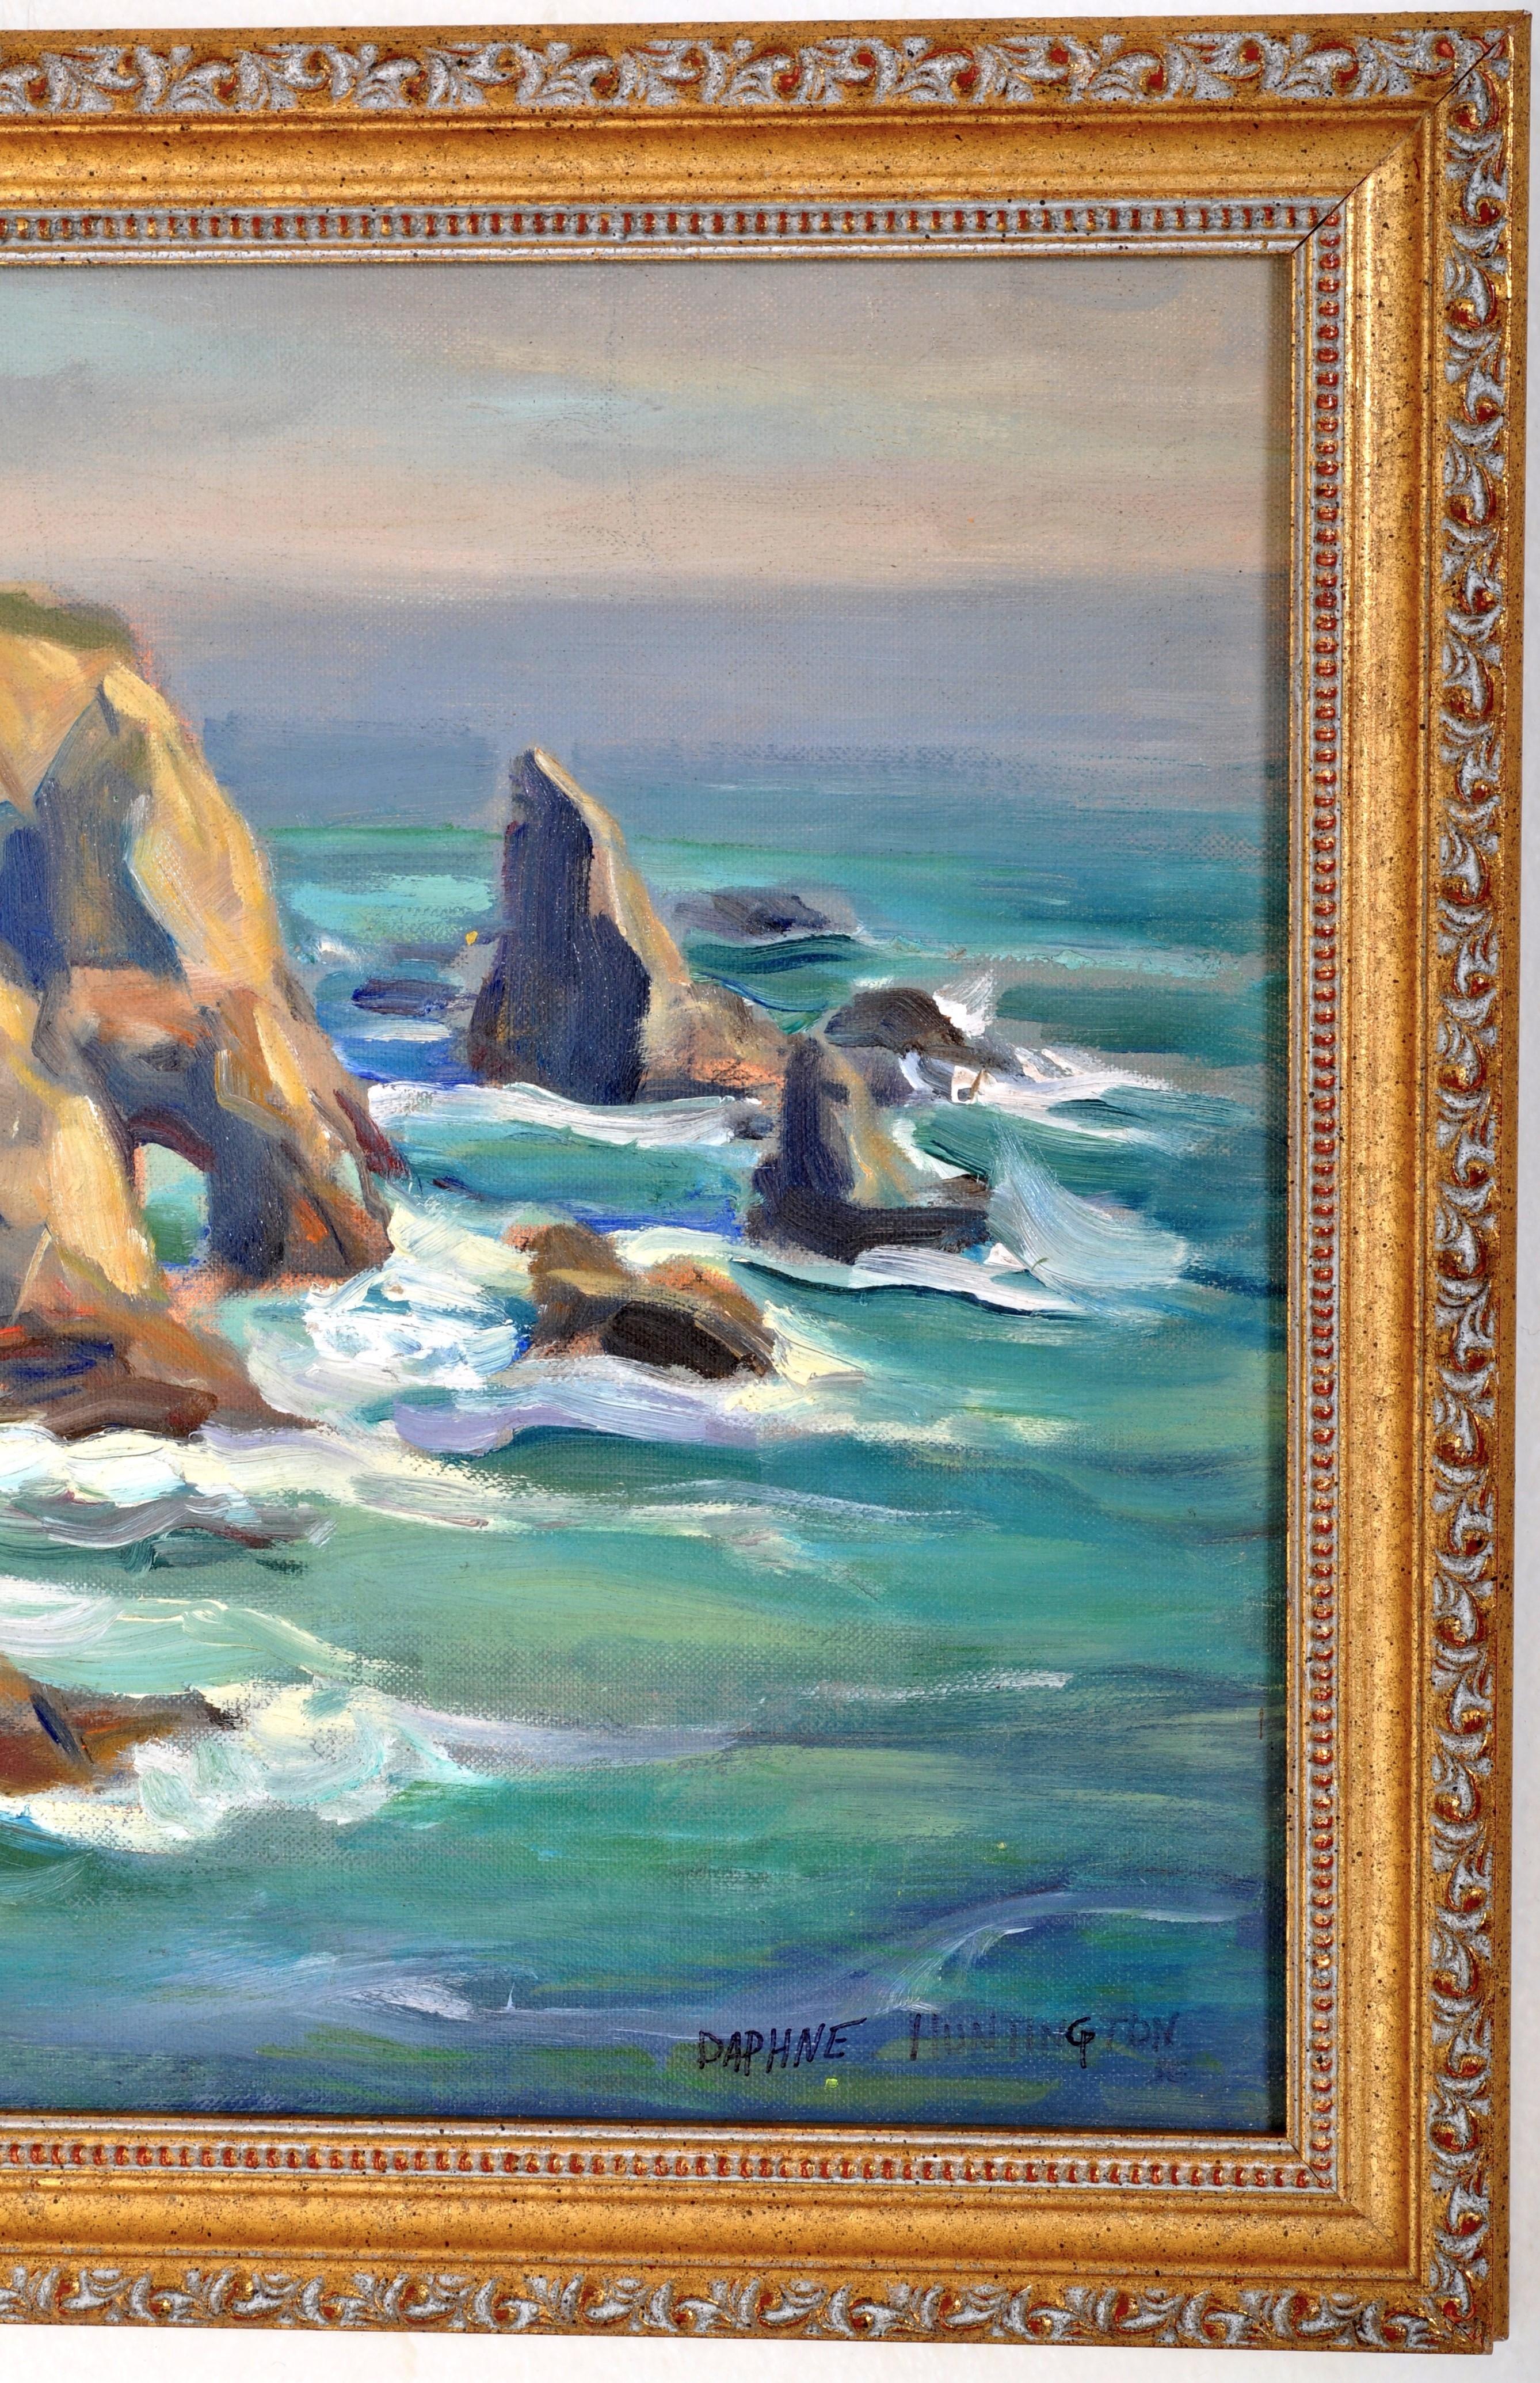 California Impressionist Oil on Canvas Painting Seascape Rocks at Malibu 1930's - Brown Landscape Painting by Daphne Huntington